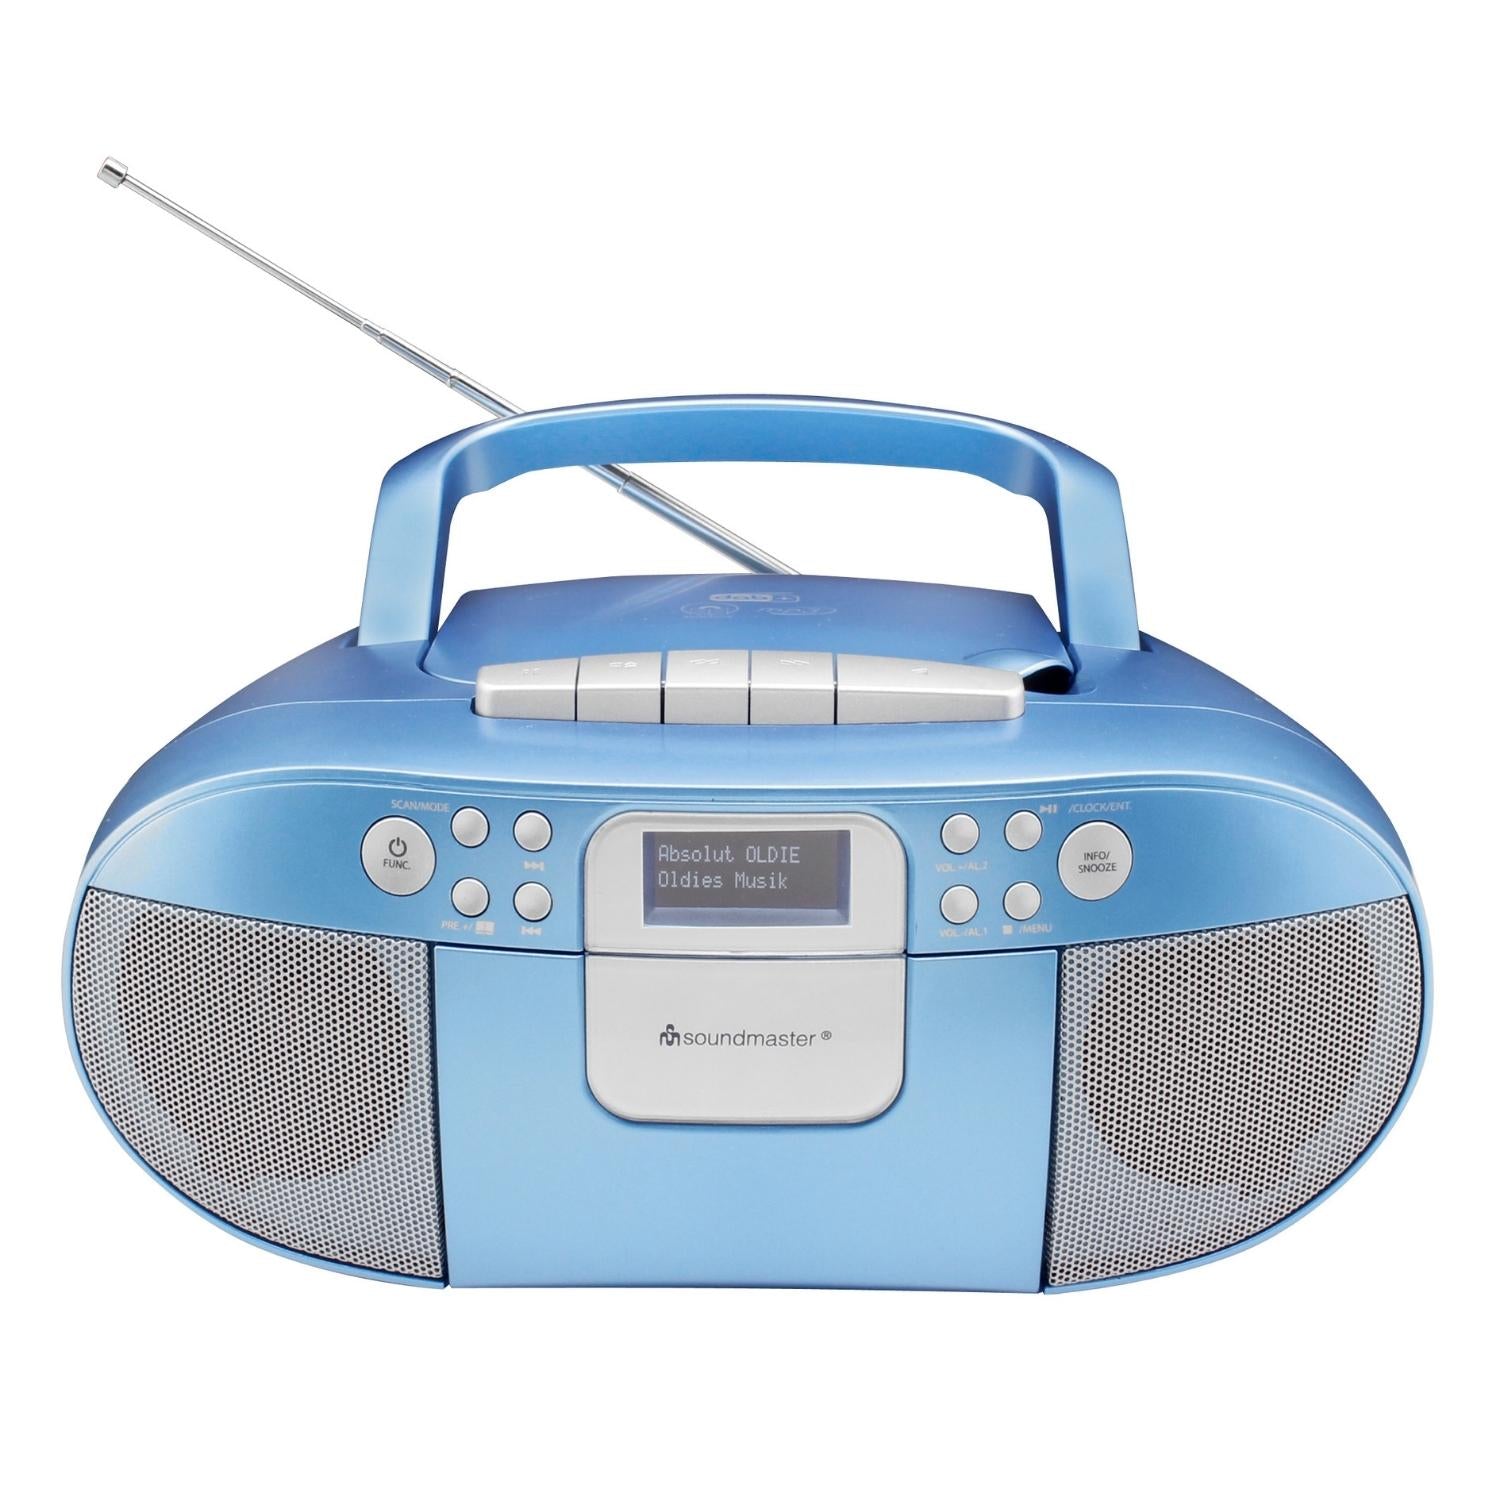 Soundmaster SCD7800BL Boombox DAB+ CD MP3 cassette recorder with USB alarm clock function, audio book function